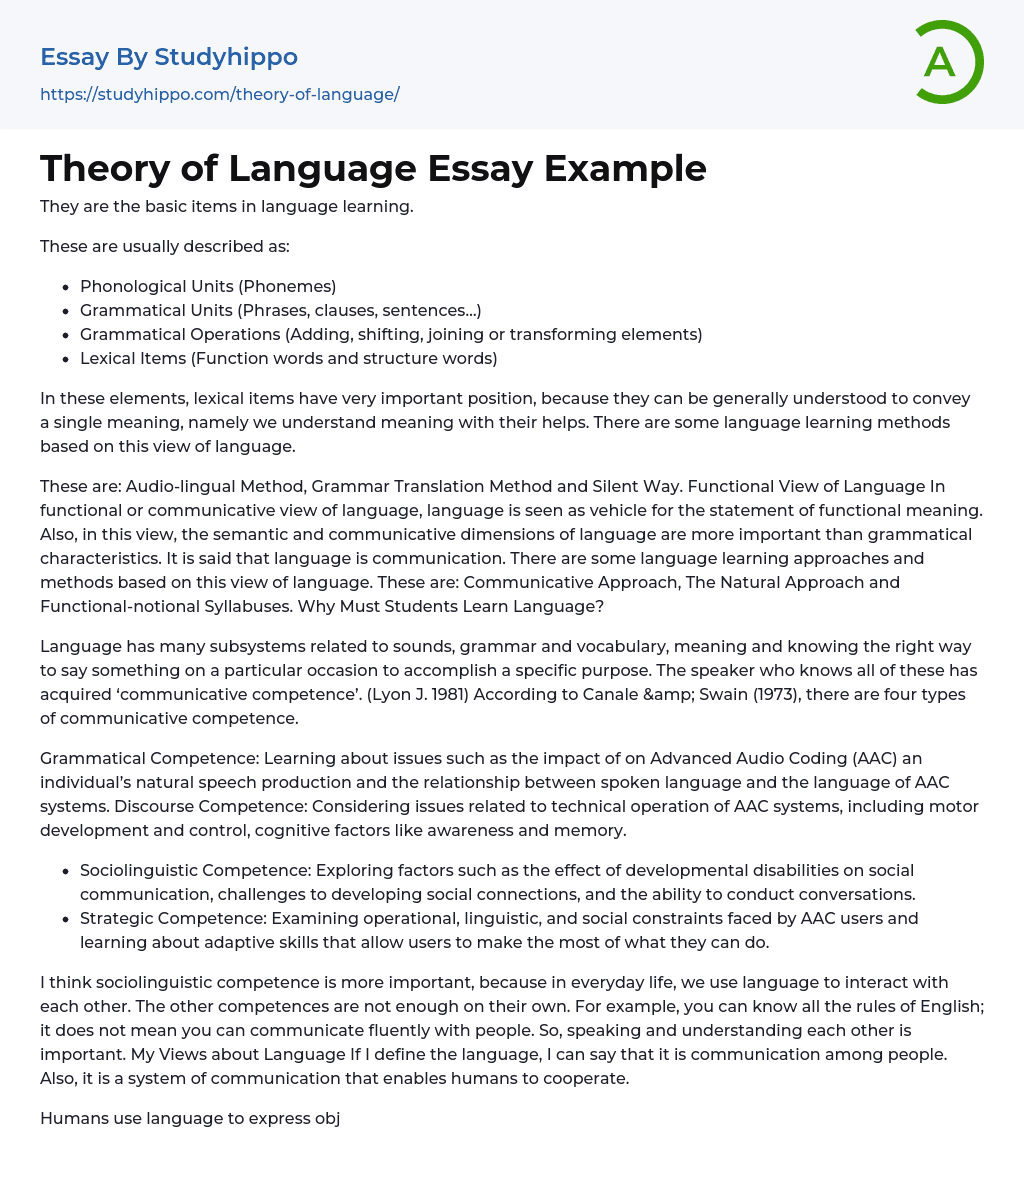 what is language essay example